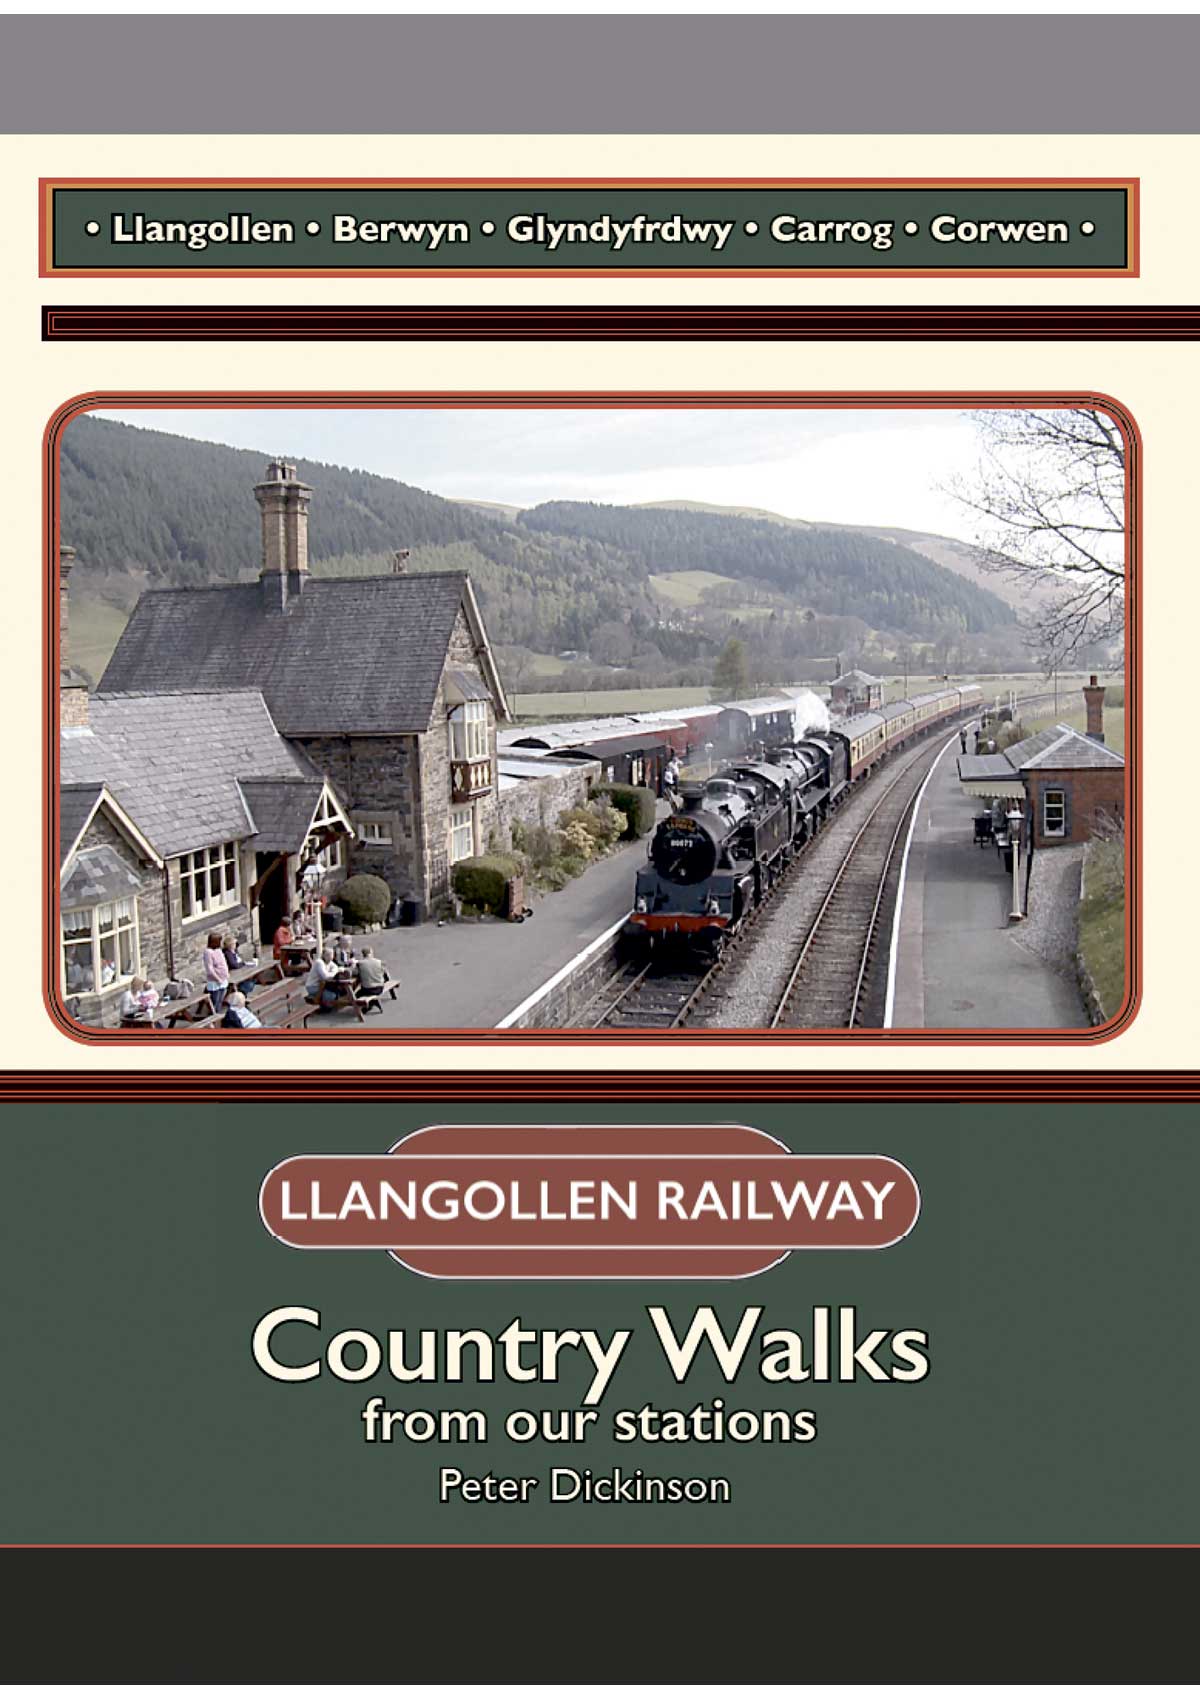 5713 - 
The Llangollen RailwayCountry Walks from our stations